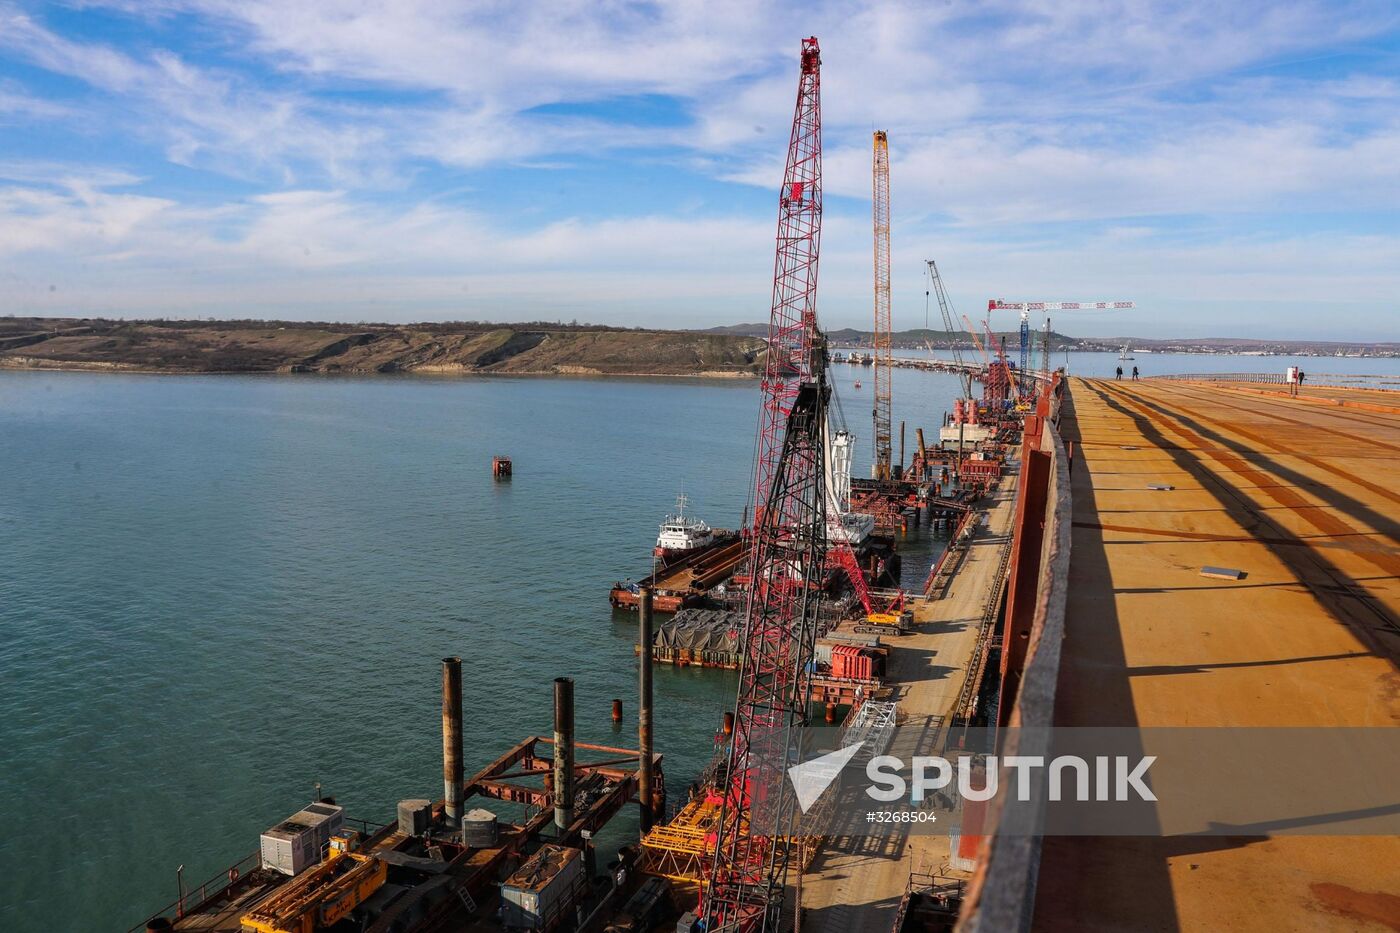 Ministry of Transport publishes photo of finished section of Crimean Bridge